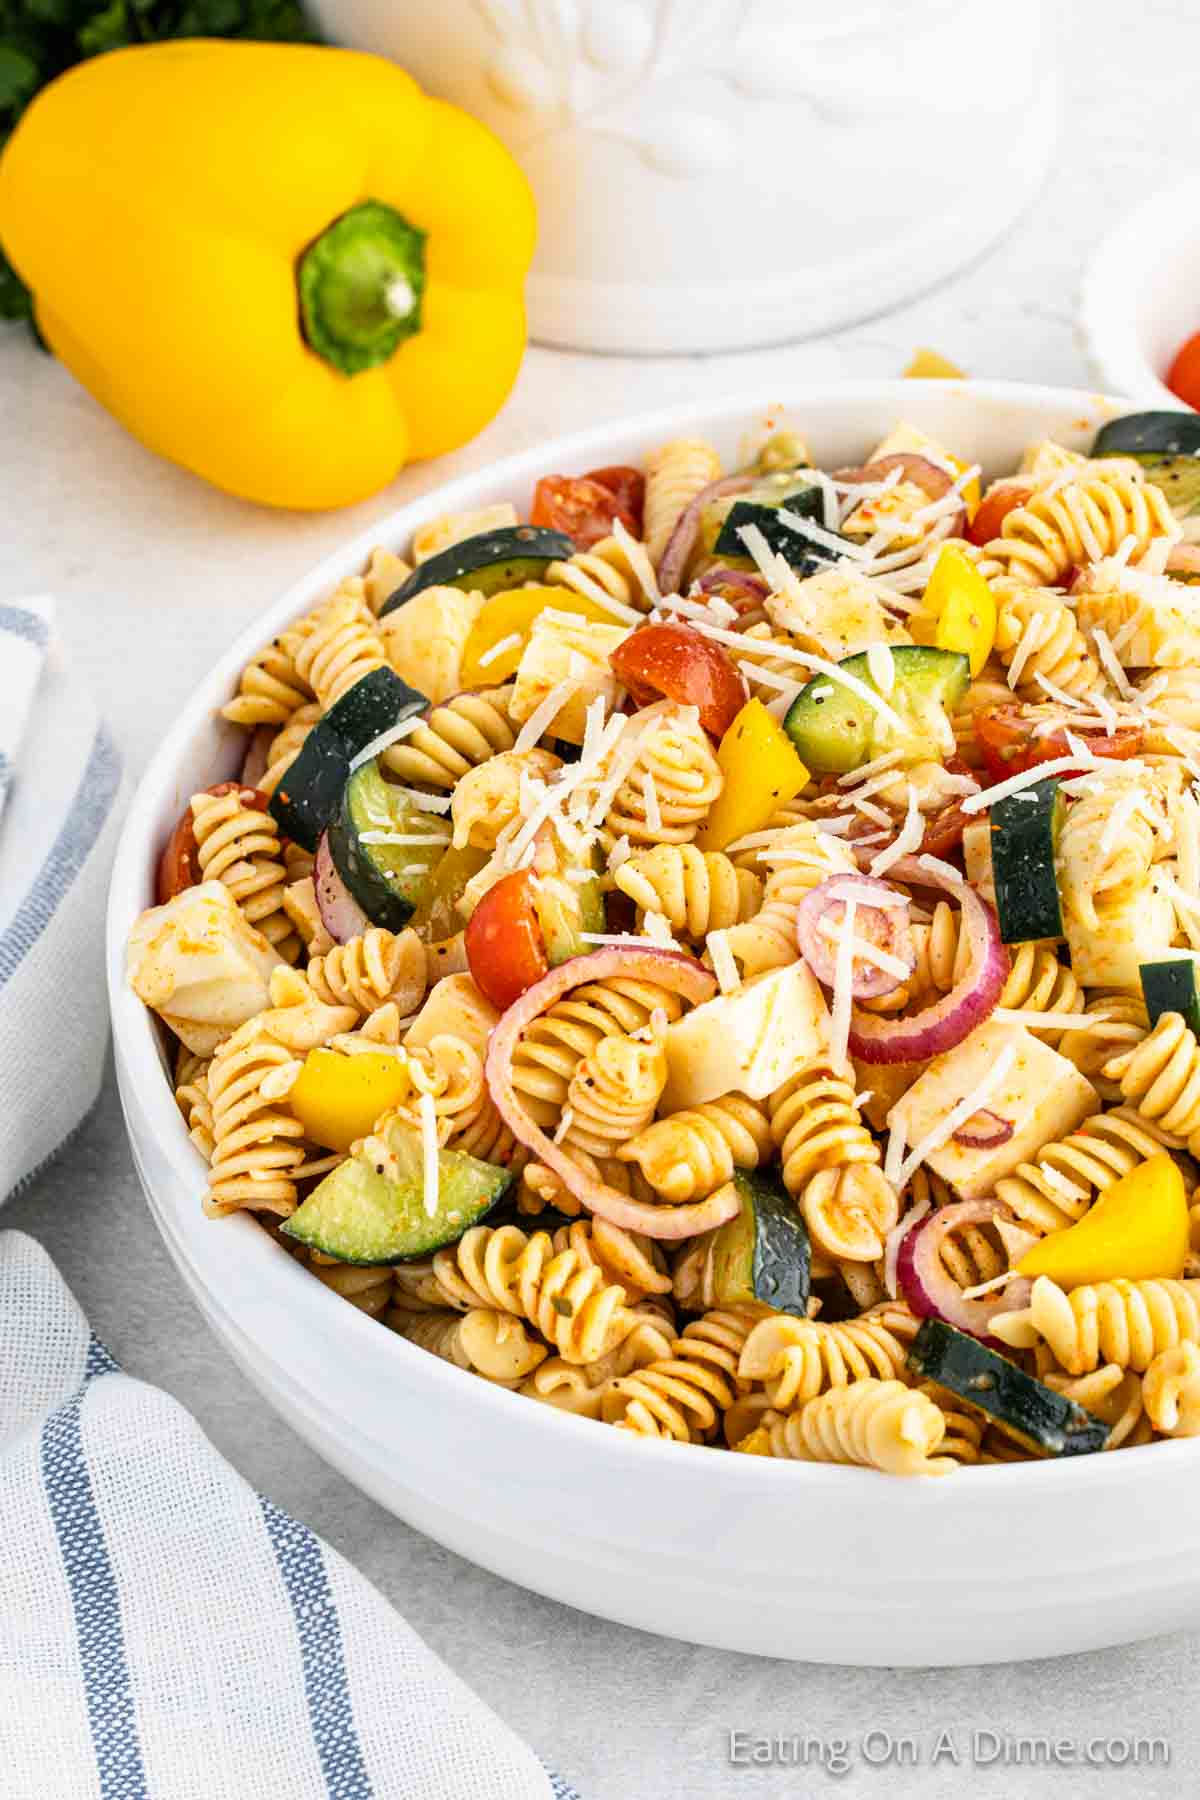 Supreme Pasta Salad in a bowl with a yellow pepper on the side